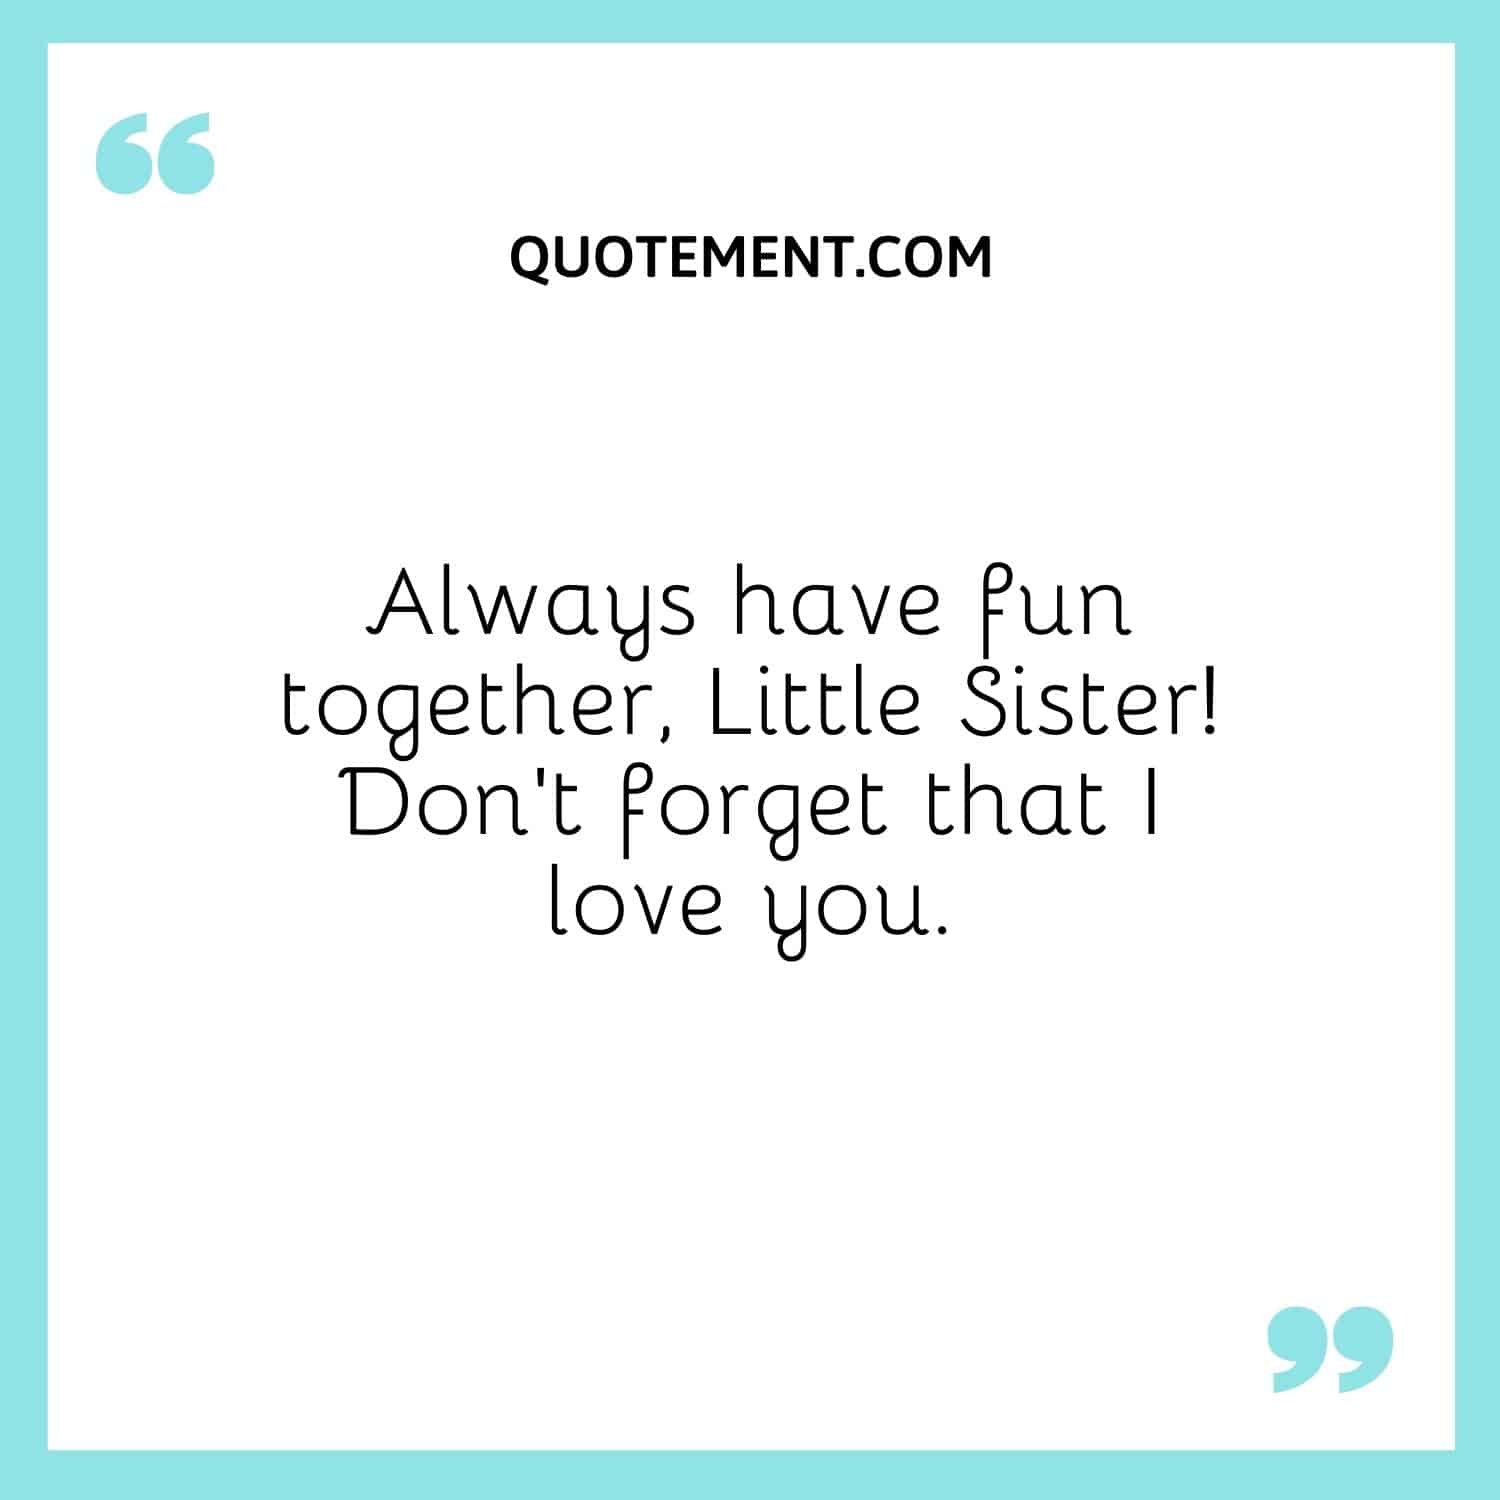 Always have fun together, Little Sister!